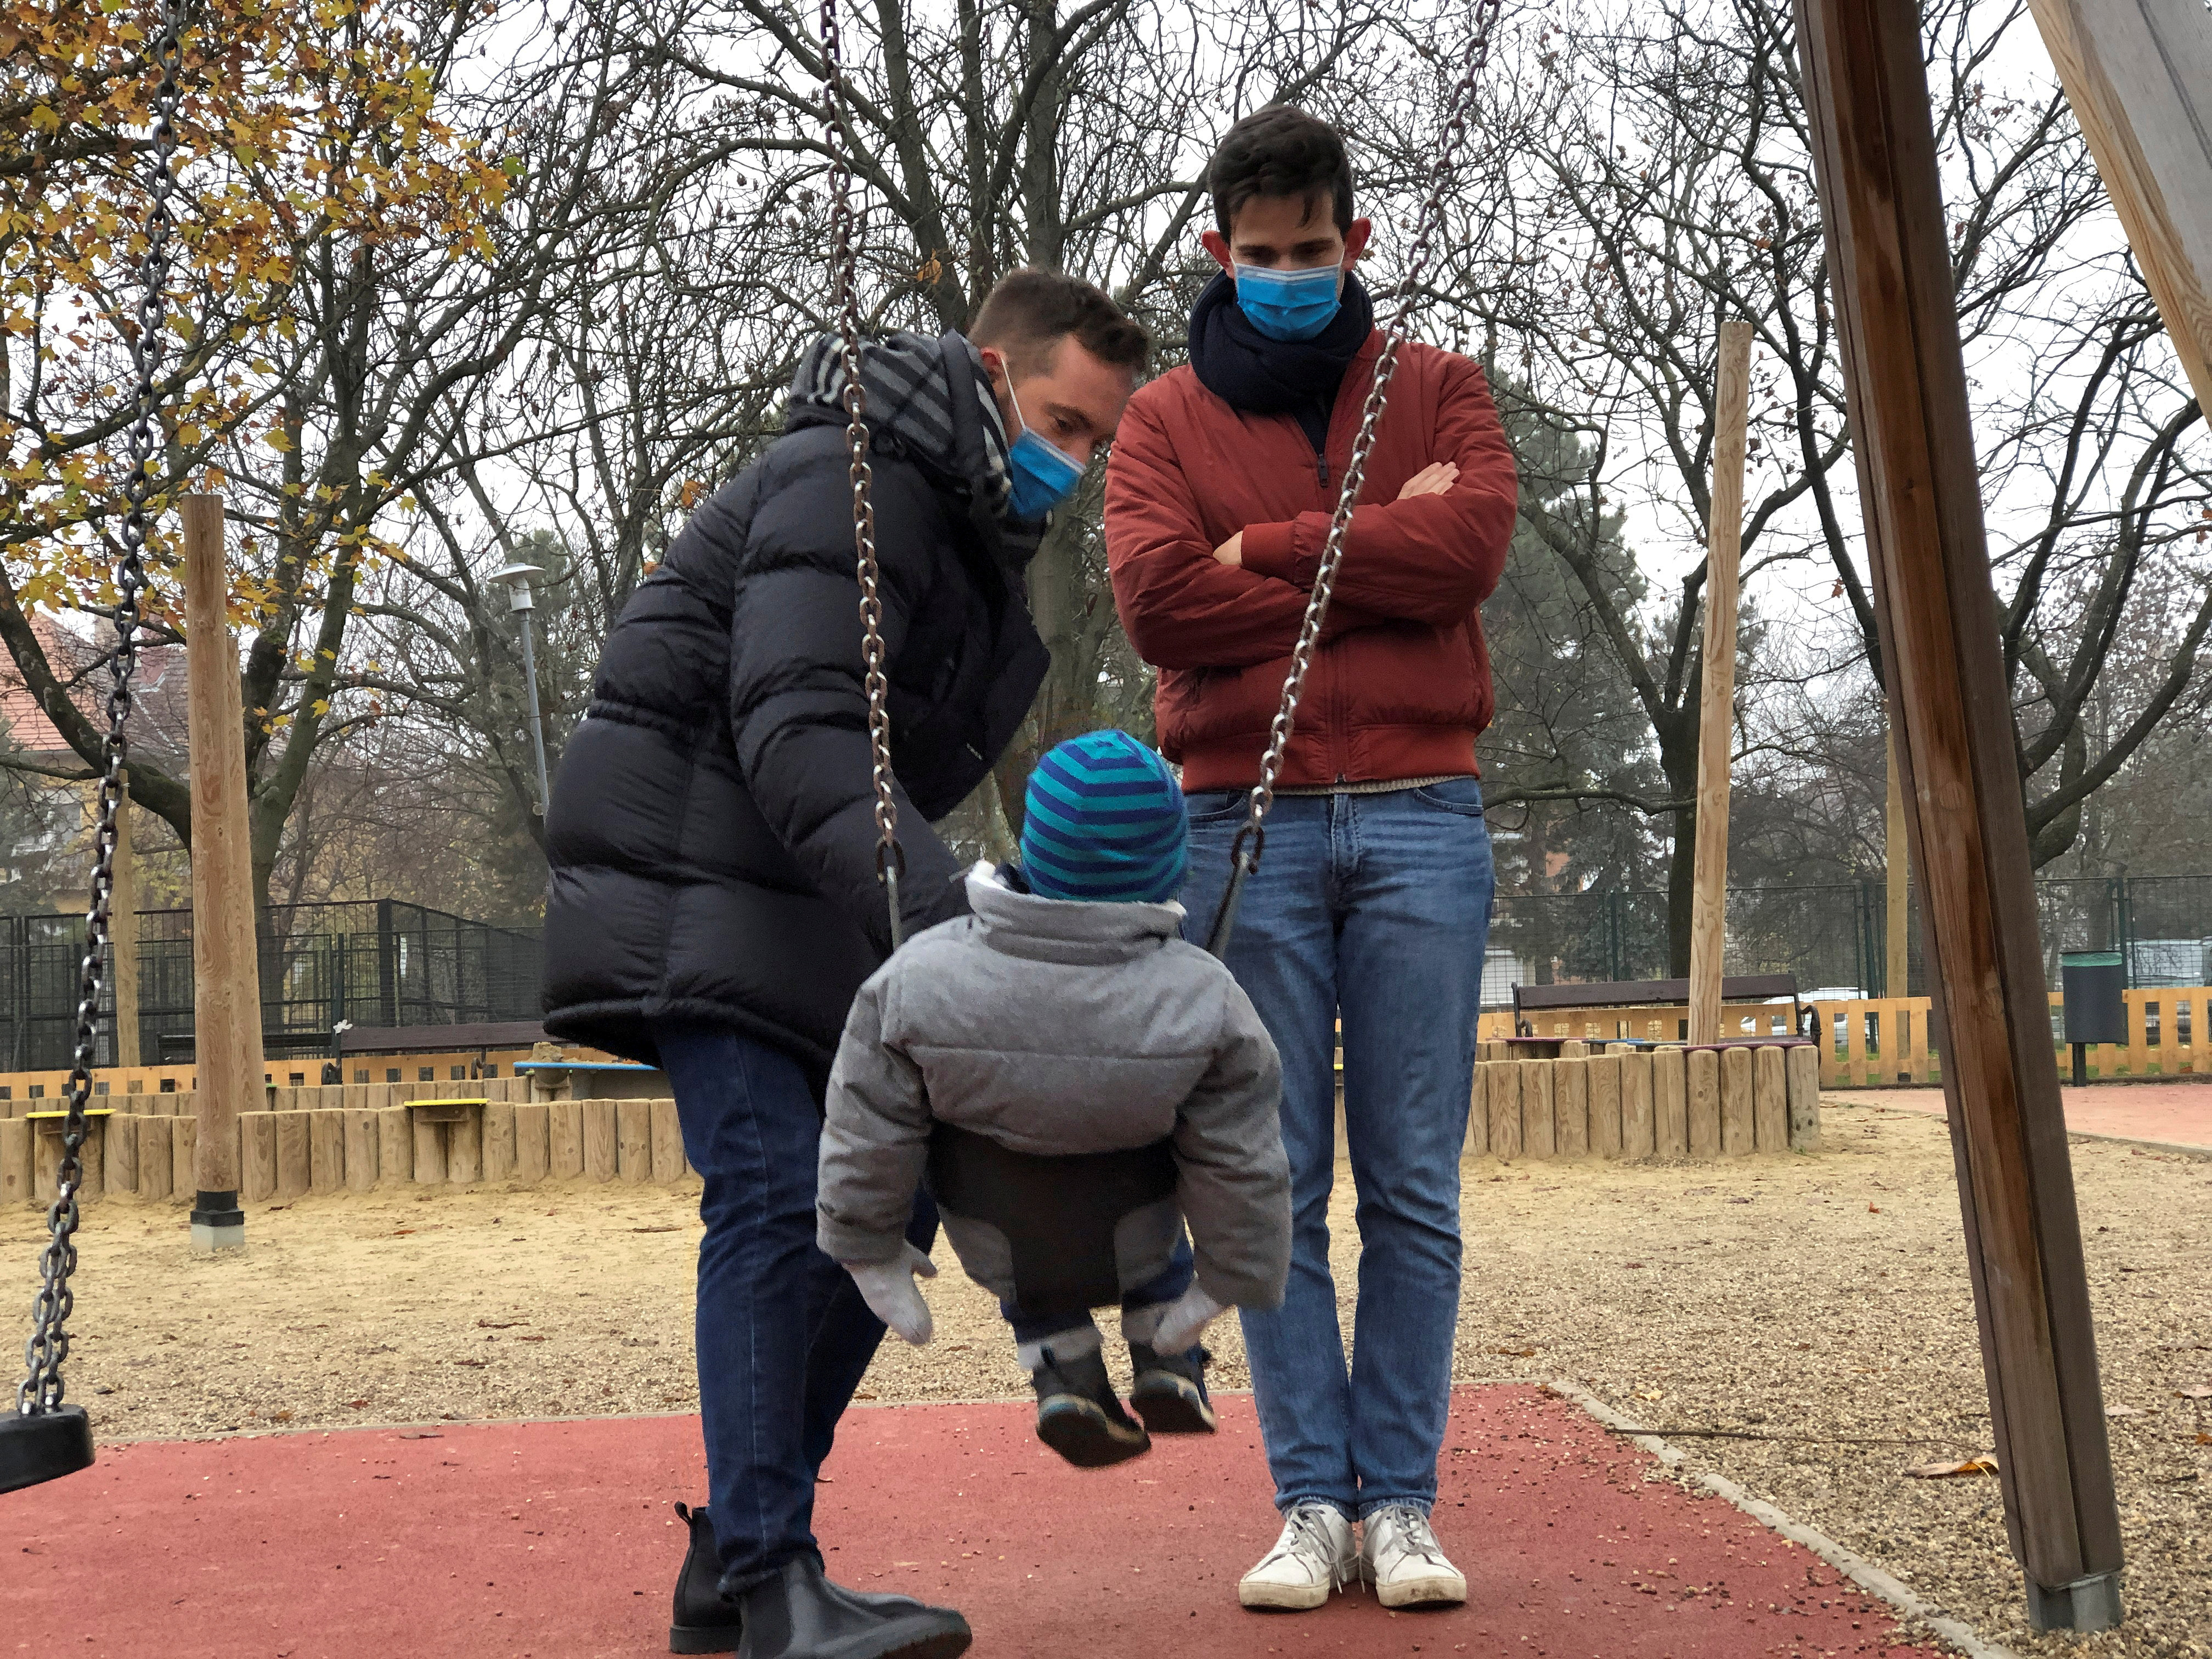 Same sex couple Adam Hanol and Marton Pal play with their four year old adopted son Andras at a playground in Budapest